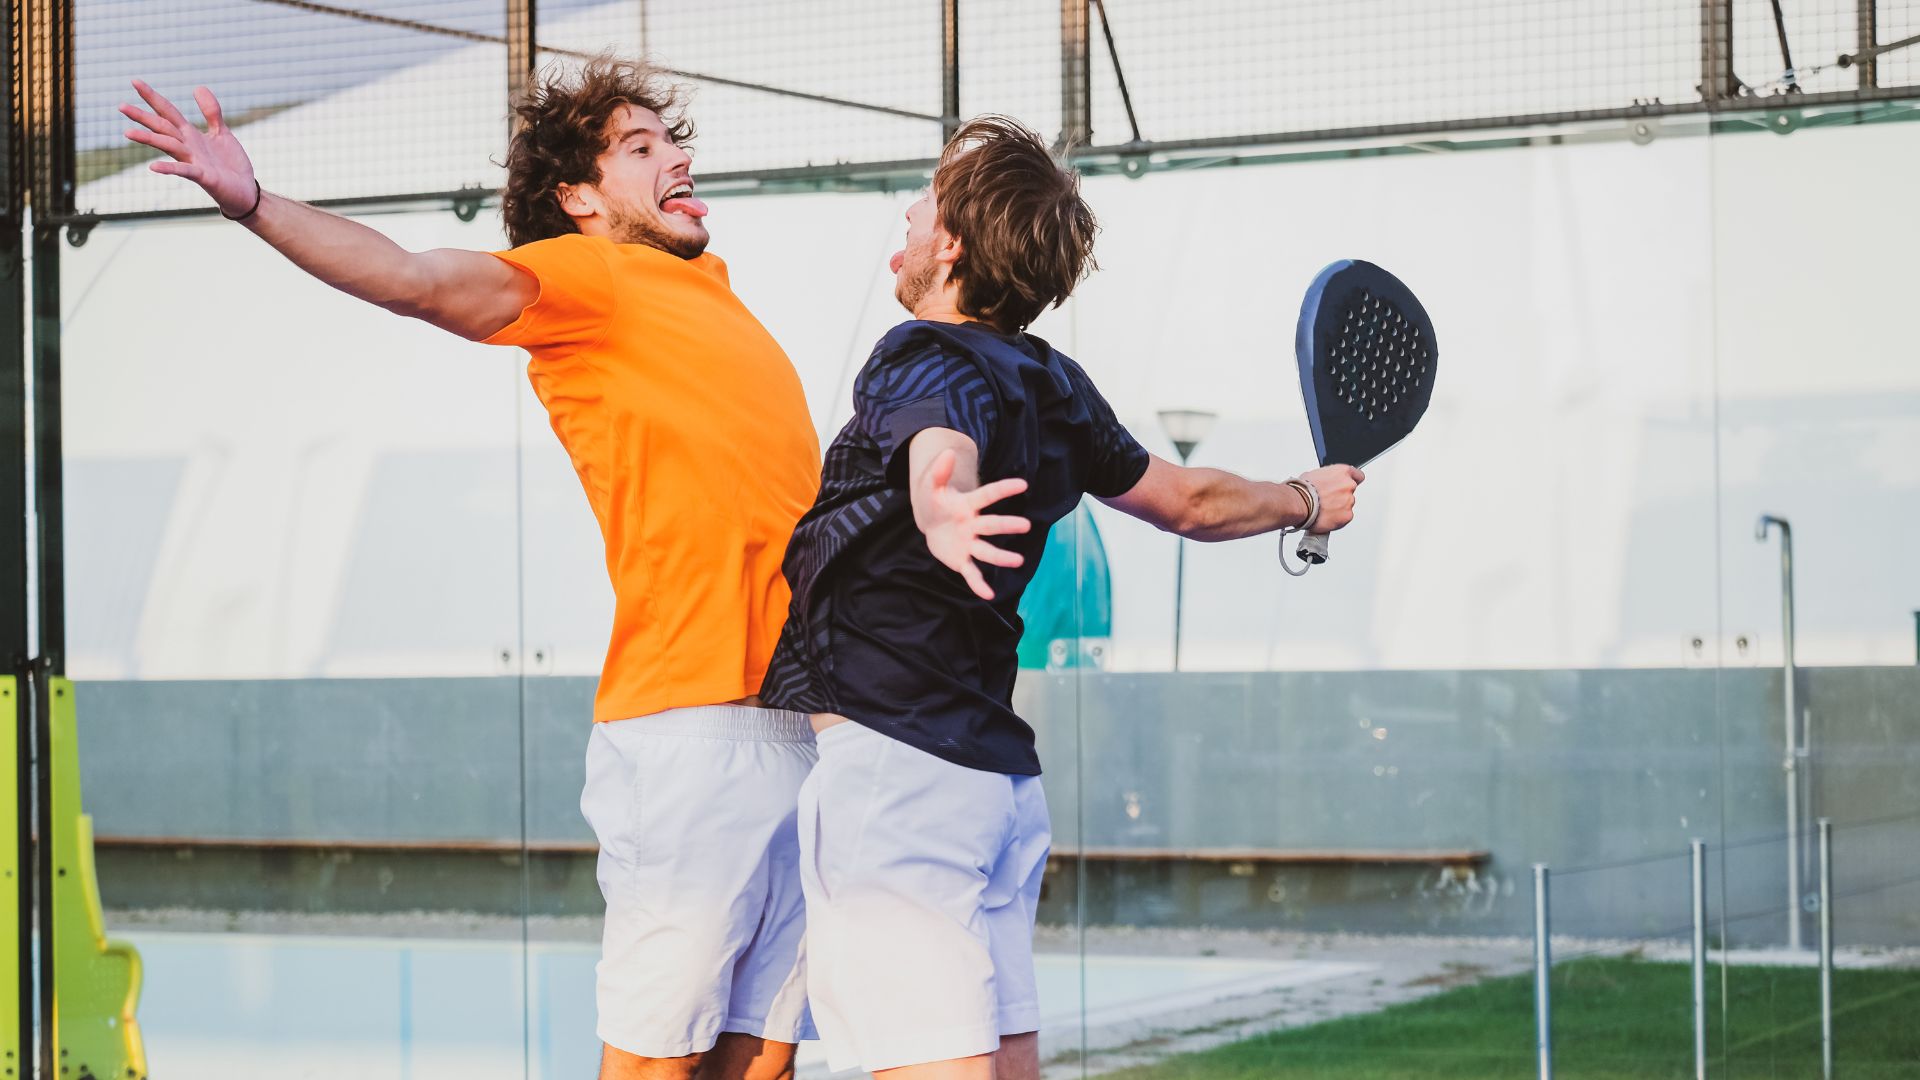 Le padel, the most practiced sport in Madrid